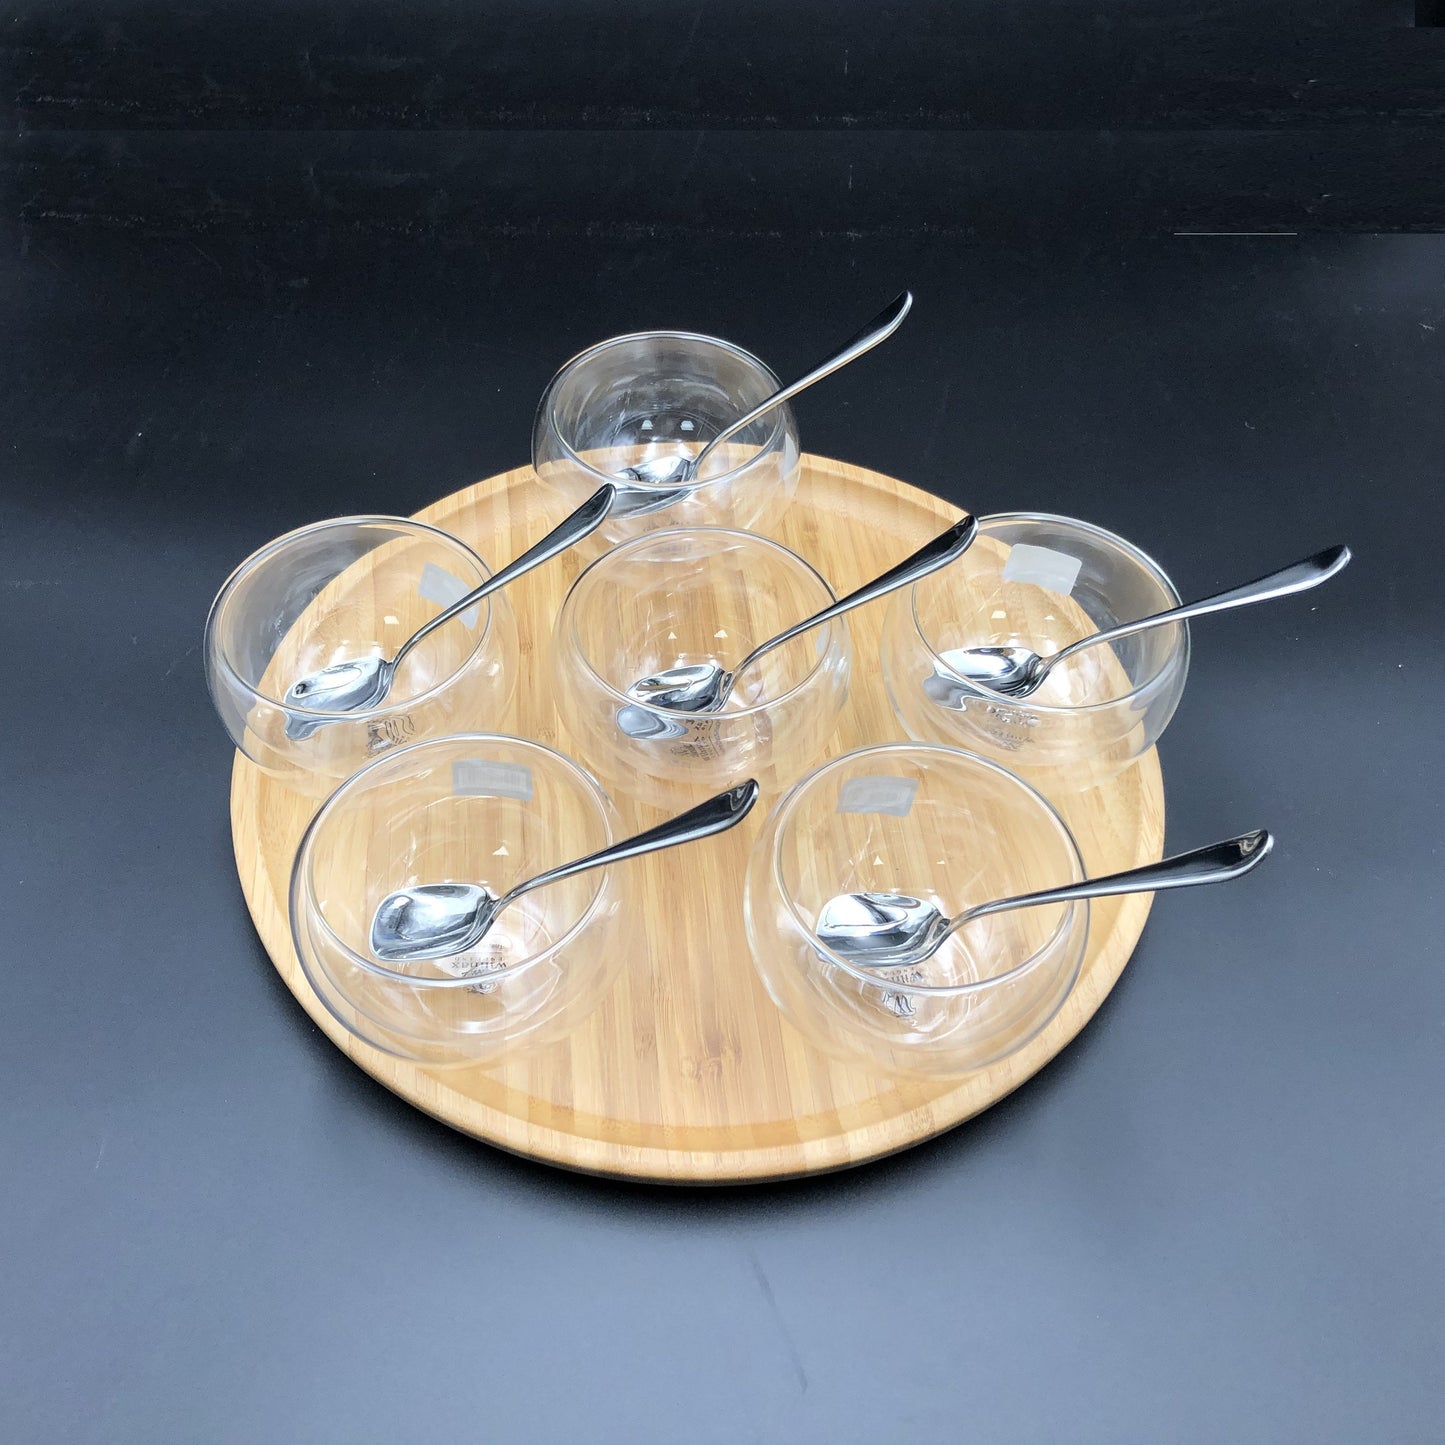  Presentation Set With 6 Large Thermo Bowls And Spoons -0